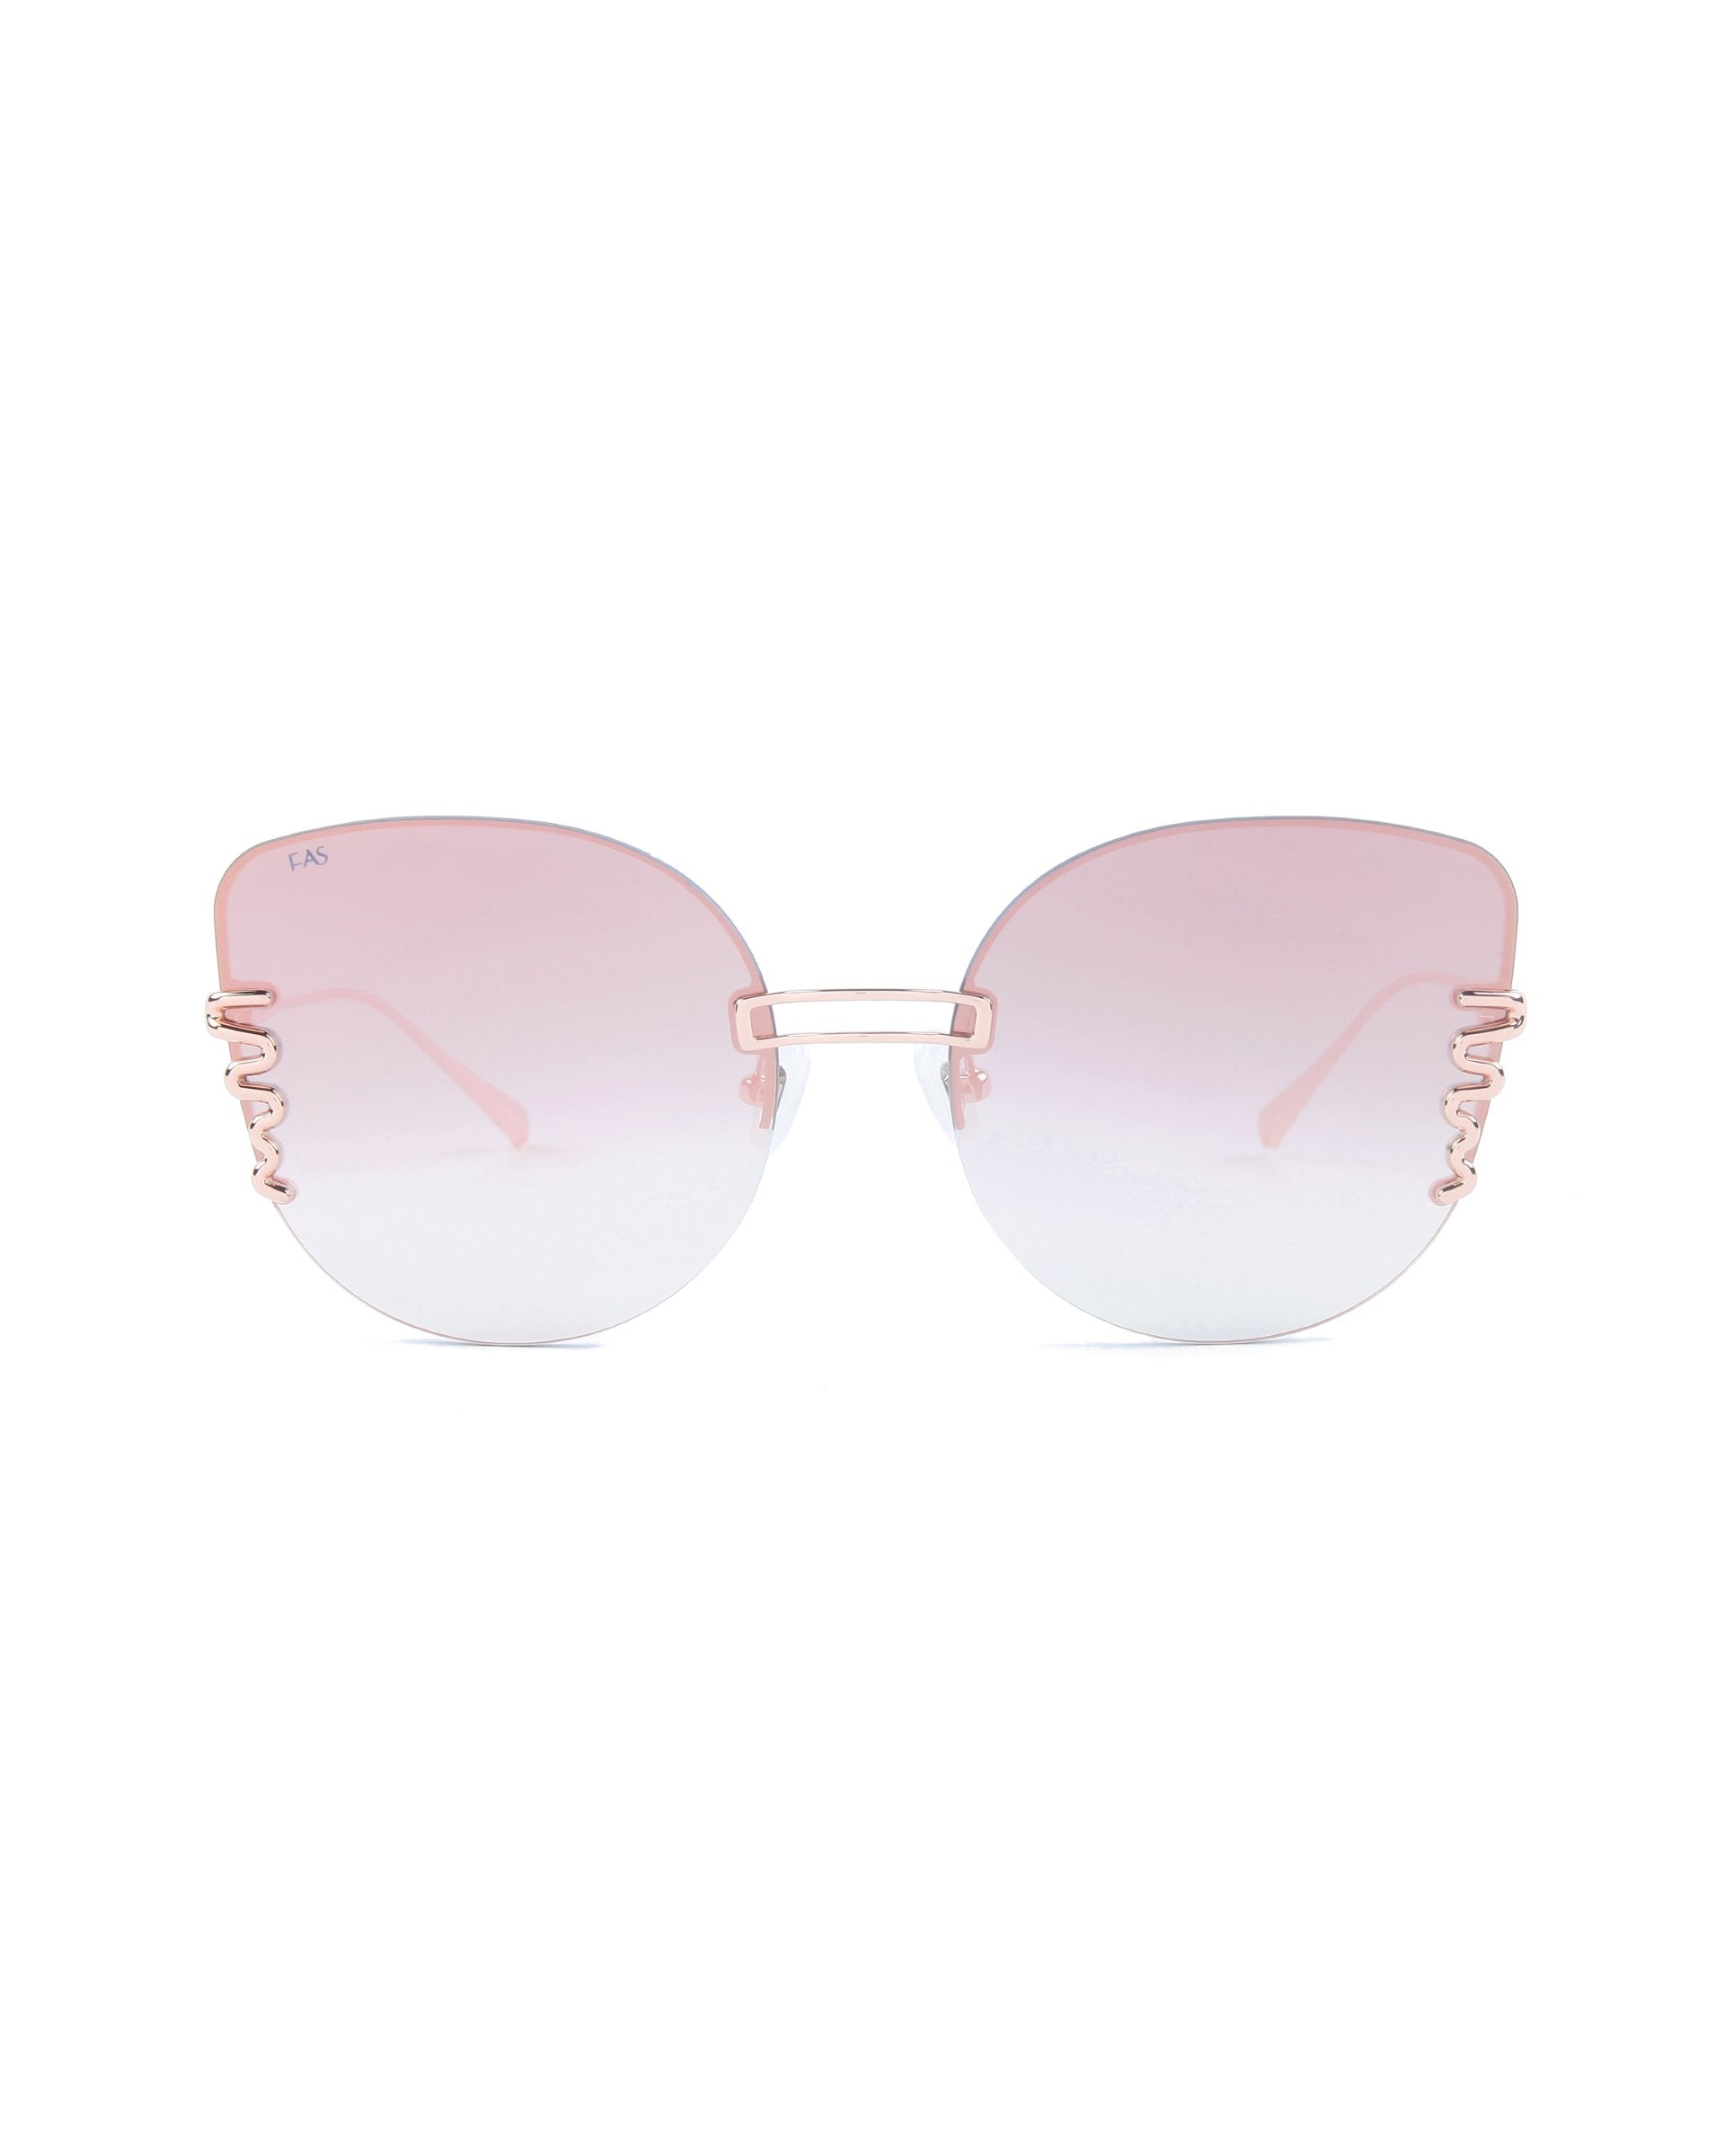 A pair of stylish oversized cat-eye sunglasses with large, round lenses featuring a gradient from pink at the top to translucent at the bottom. The frameless design includes a gold double bridge, delicate gold accents at the temples, and adjustable nosepads for a perfect fit: Girlboss by For Art's Sake®.